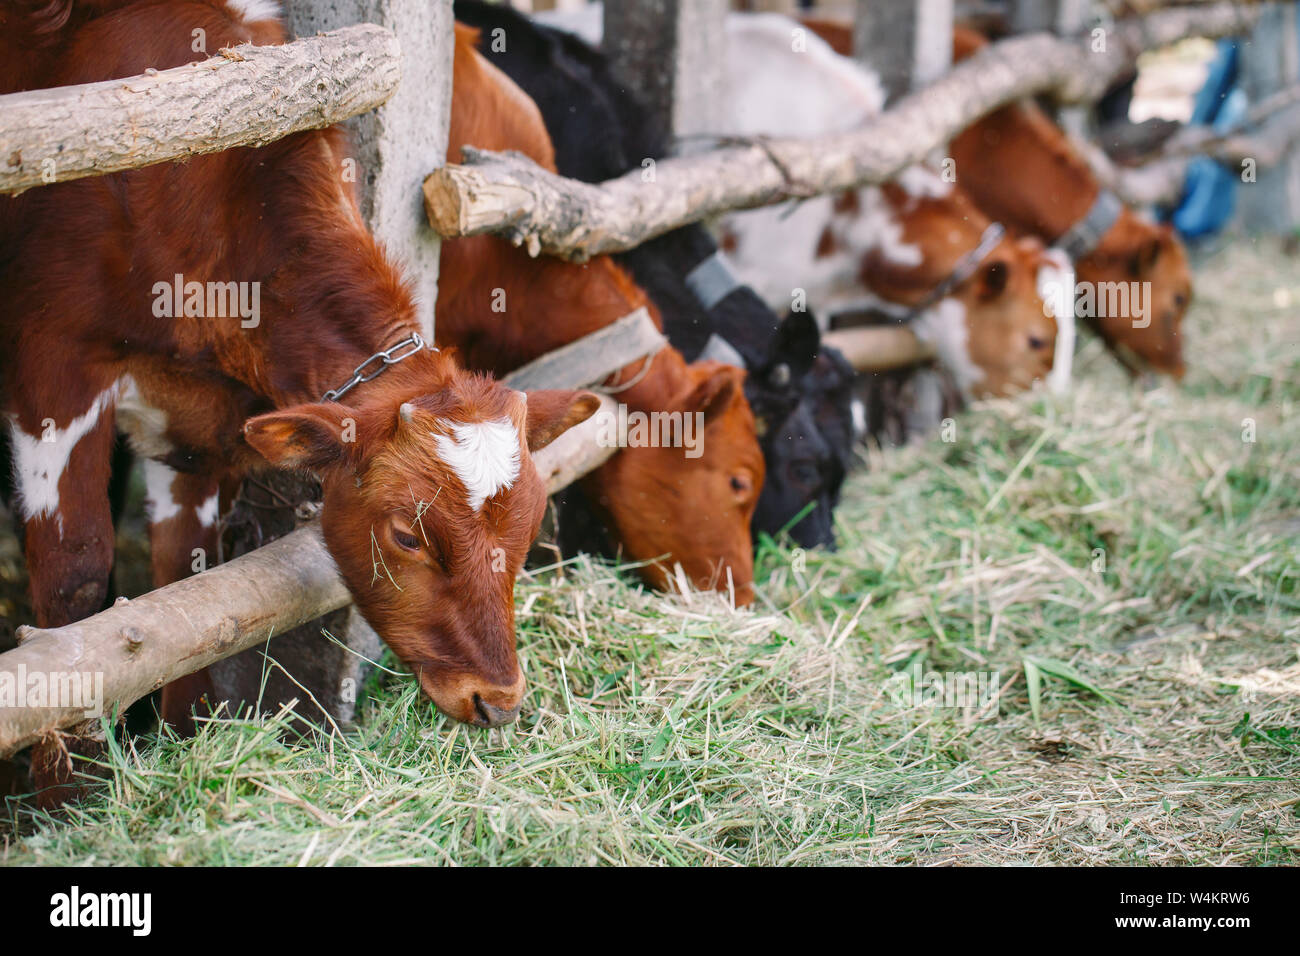 agriculture industry, farming and animal husbandry concept. herd of cows in cowshed on dairy farm Stock Photo